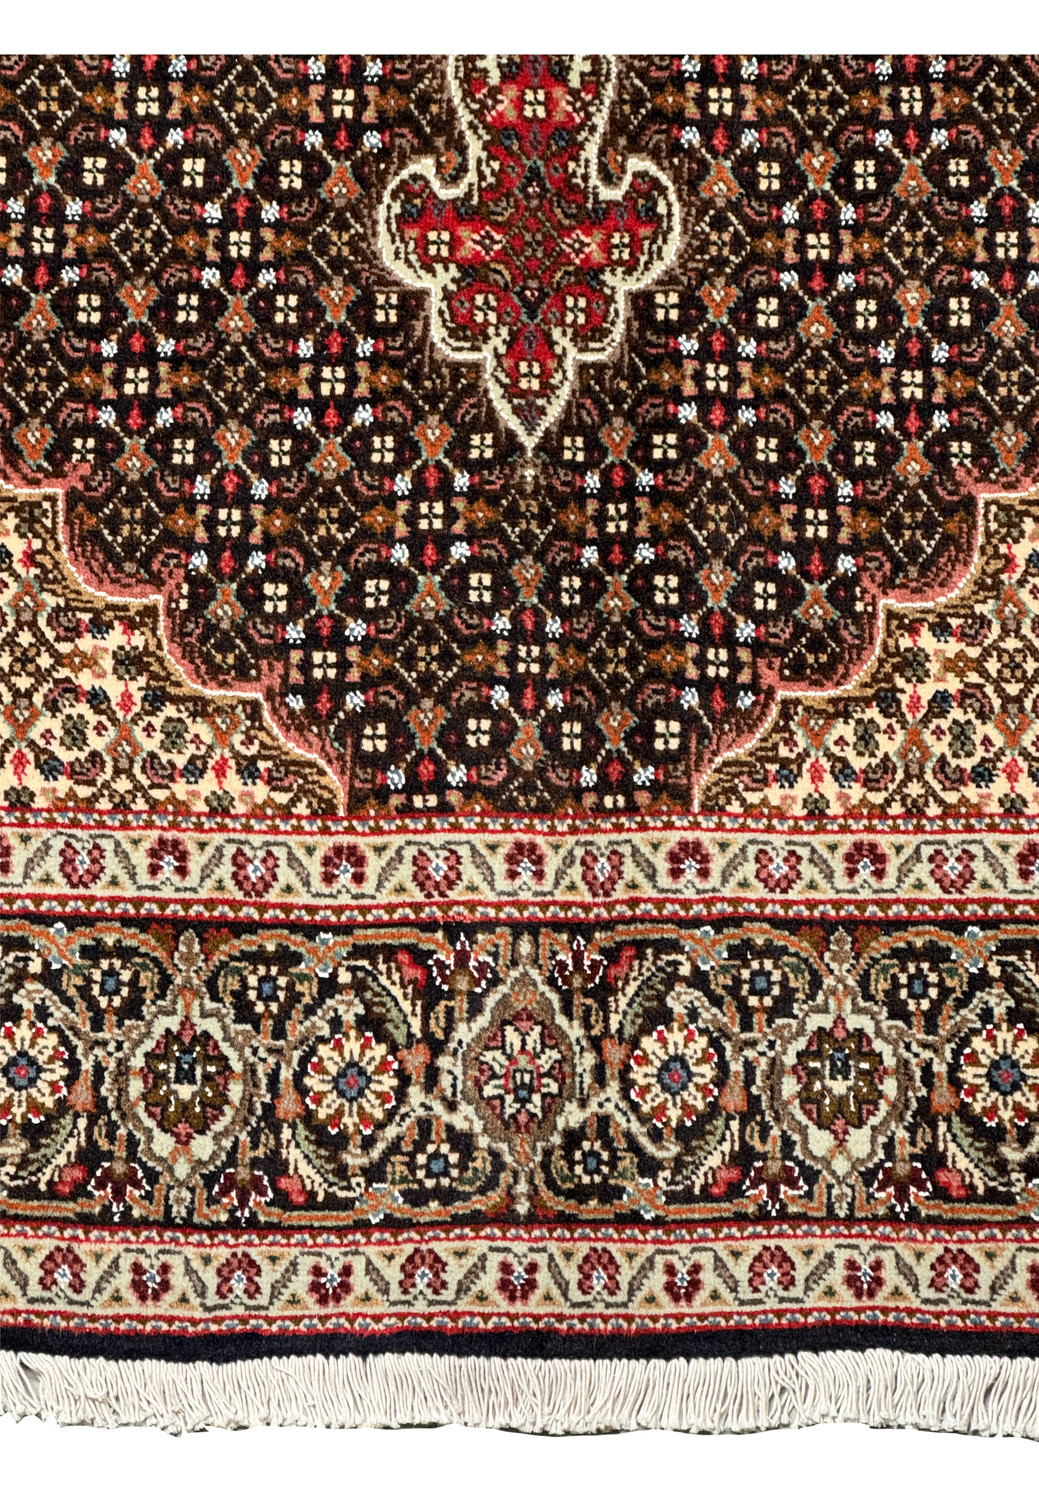 Close-up of the corner of a Persian Tabriz Mahi rug, highlighting the fine craftsmanship of the cream and beige floral motifs on a dark brown background